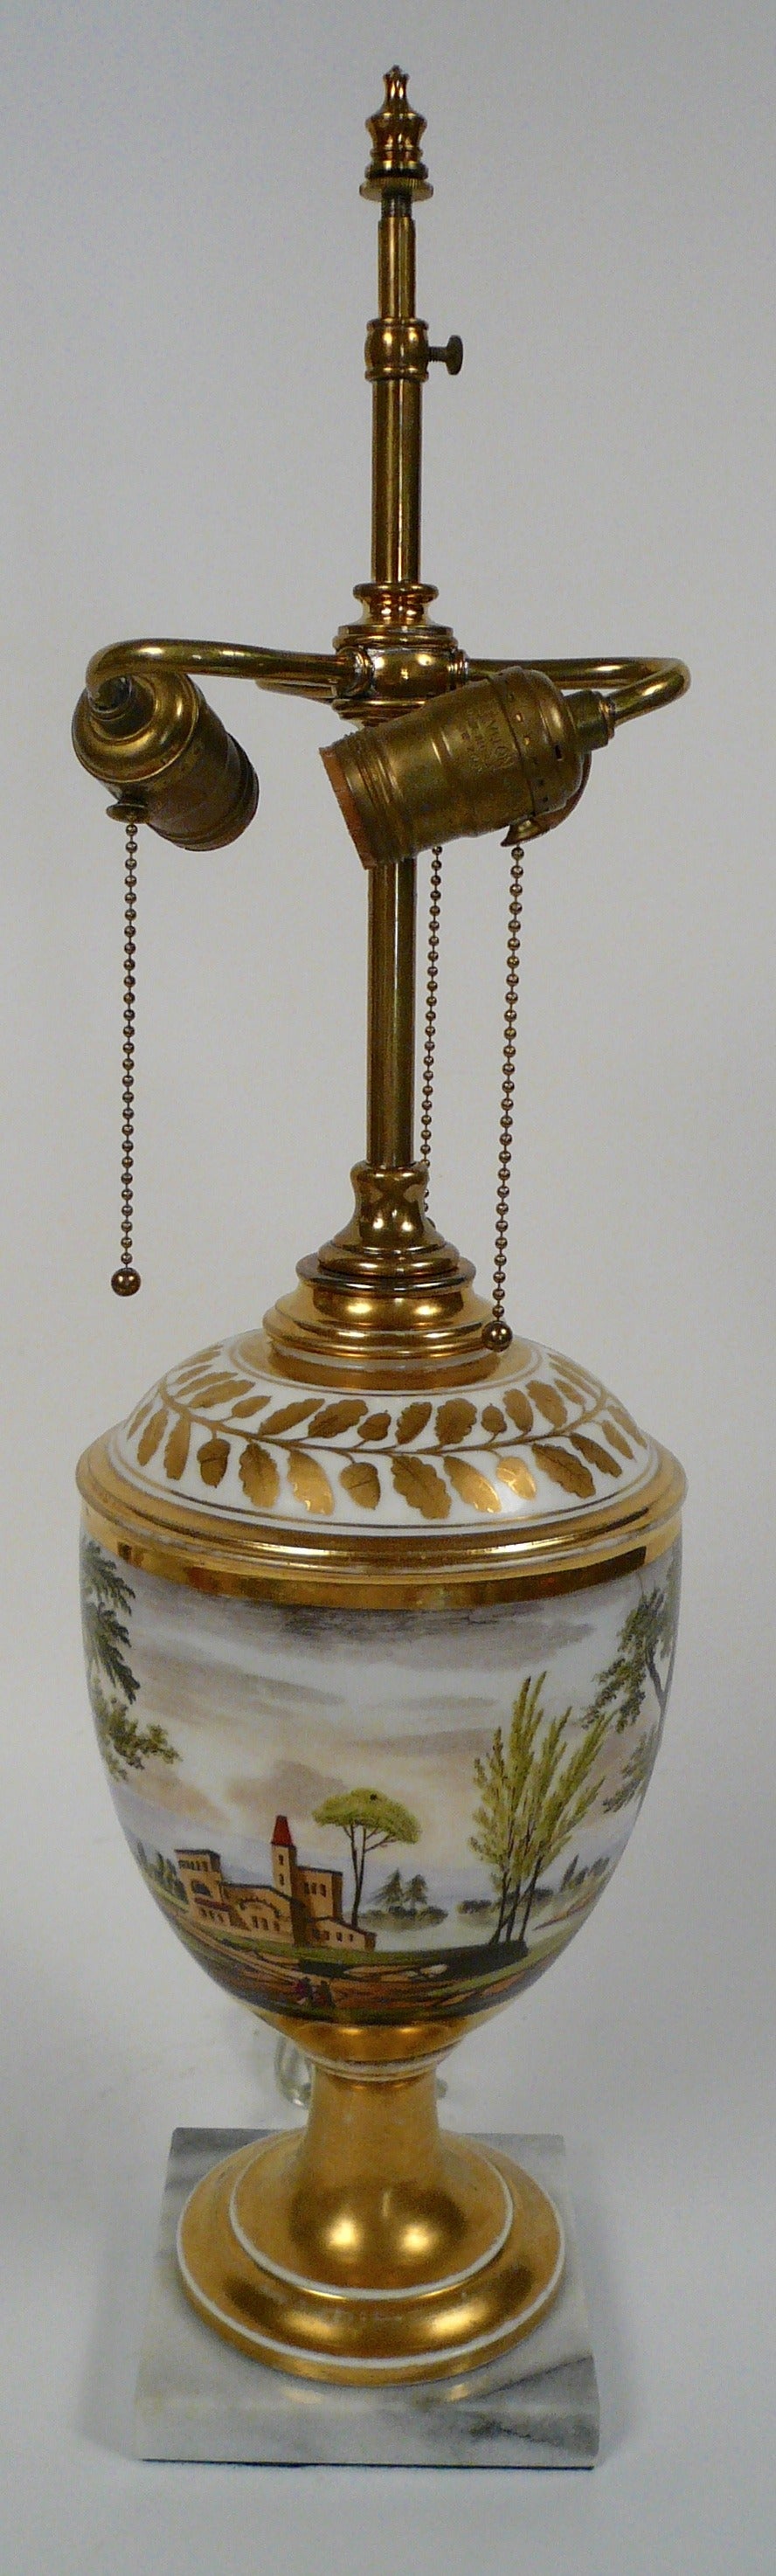 This Old Paris porcelain urn is hand painted with figures in a landscape, has a marble base, and dates from the mid-19th Century.